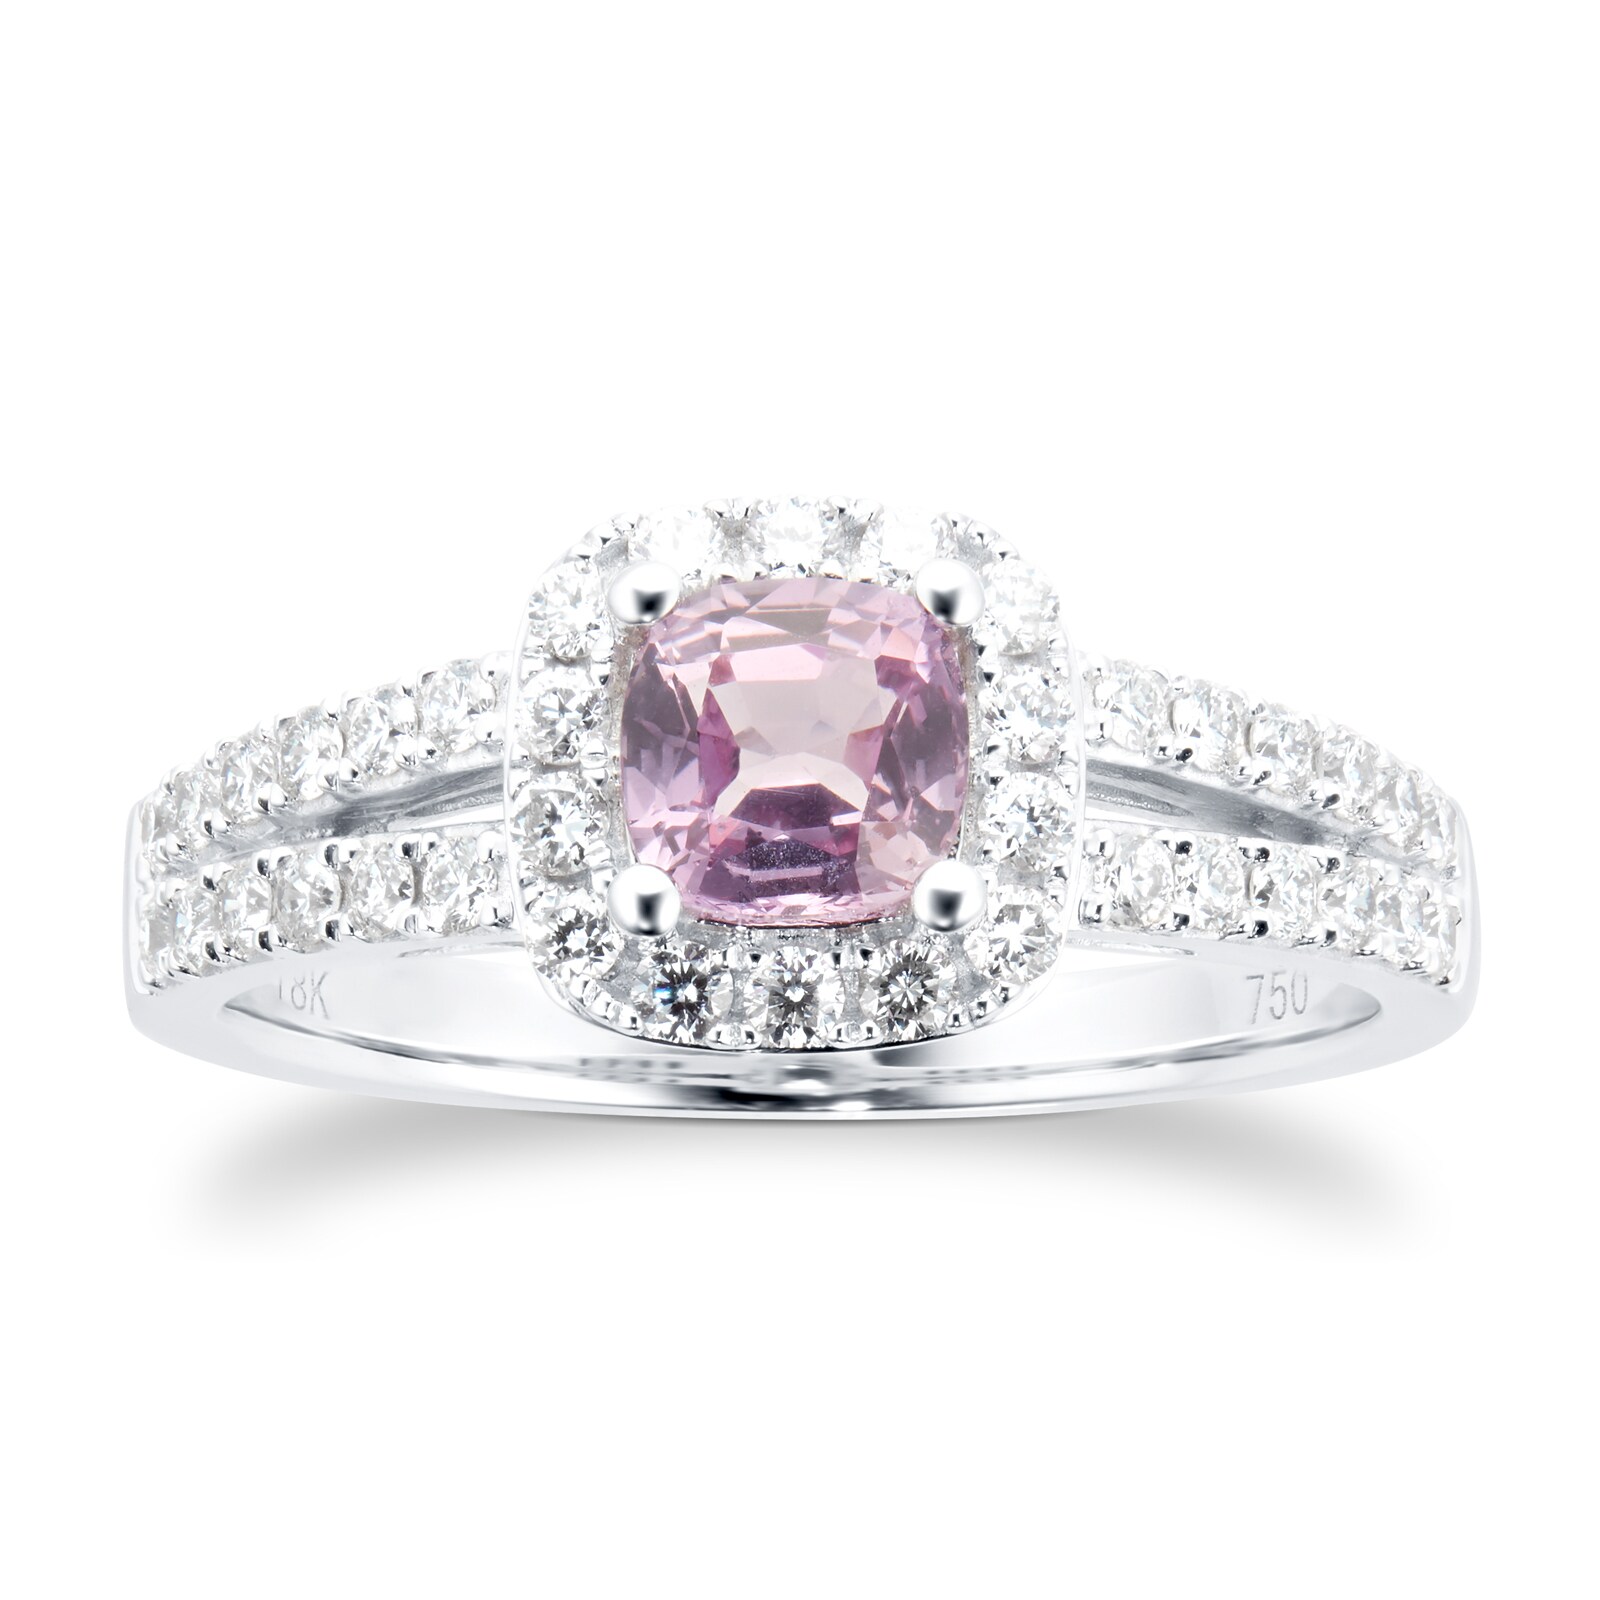 18ct White Gold Pink Sapphire & 0.43cttw Diamond Cushion Cut Halo Ring - Ring Size N